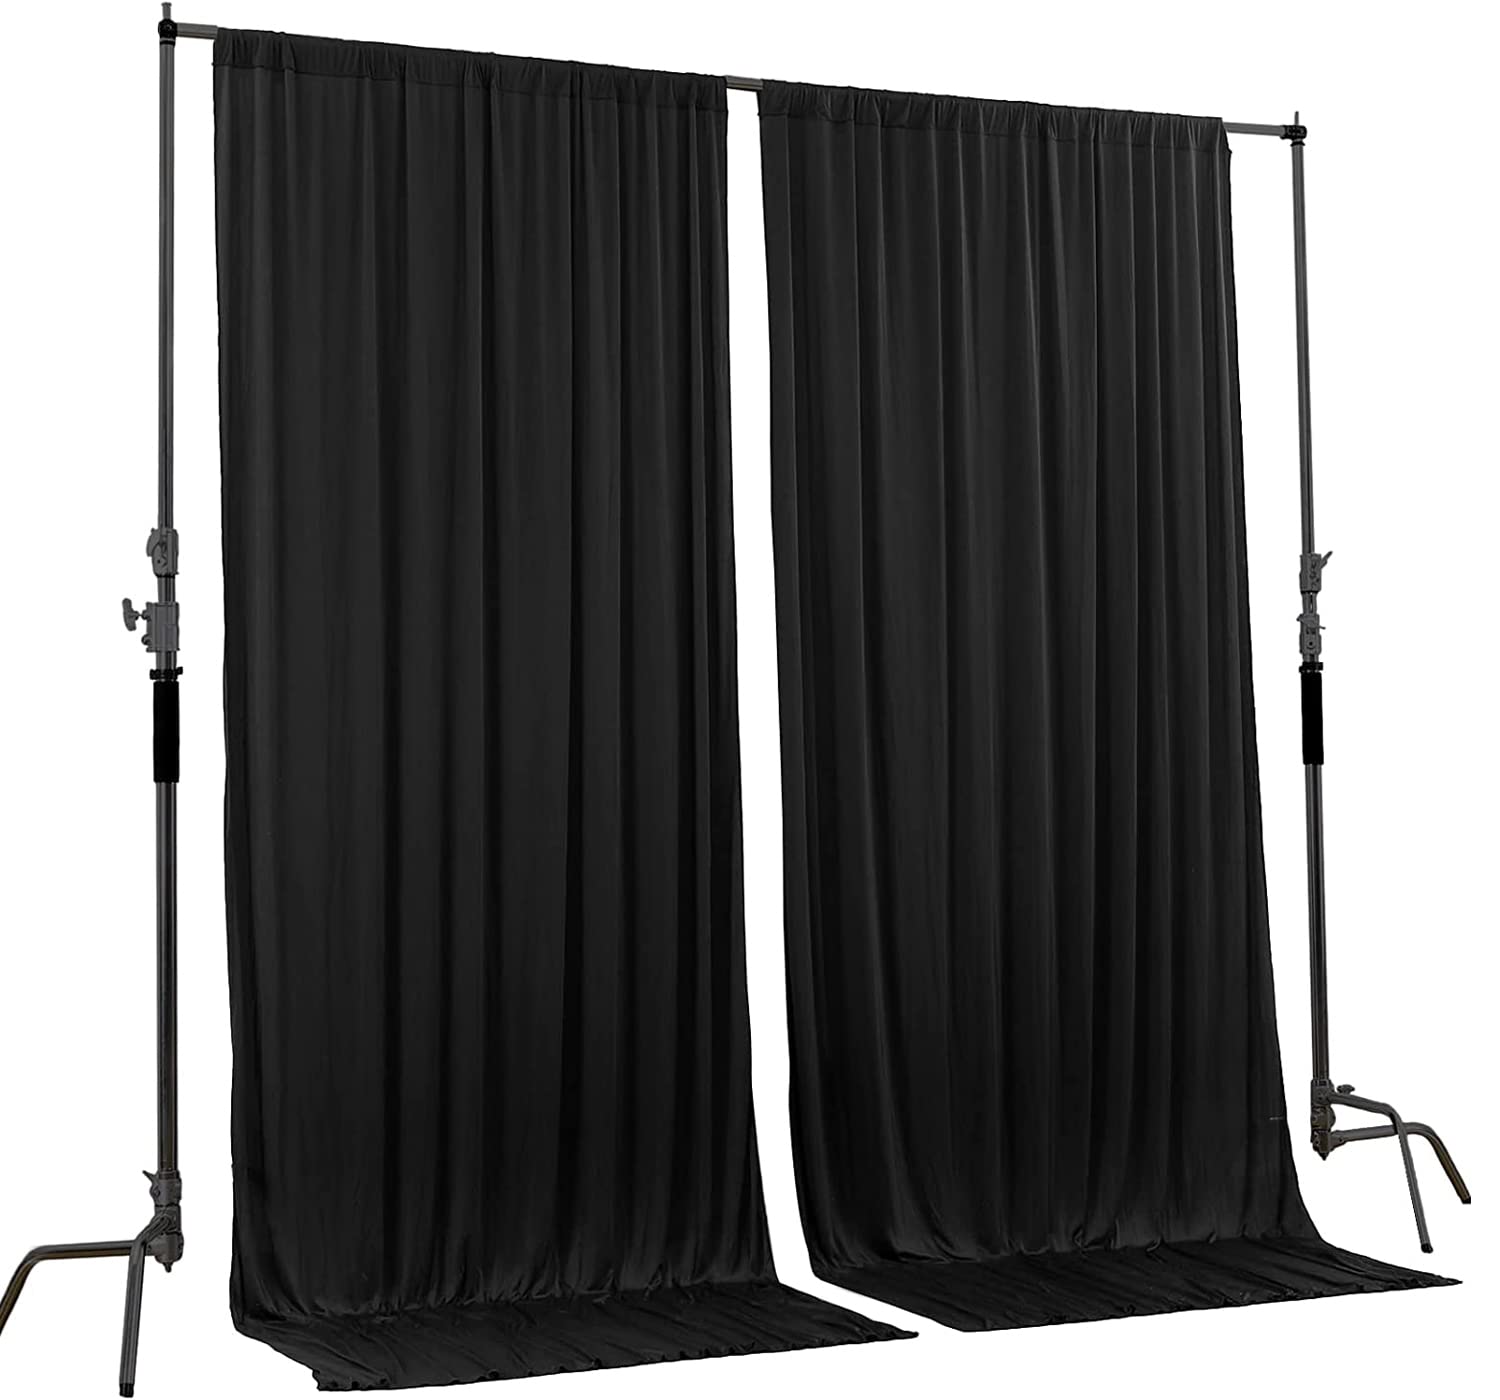 AK TRADING CO. 10 feet x 10 feet Polyester Backdrop Drapes Curtains Panels with Rod Pockets - Wedding Ceremony Party Home Window Decorations - Black